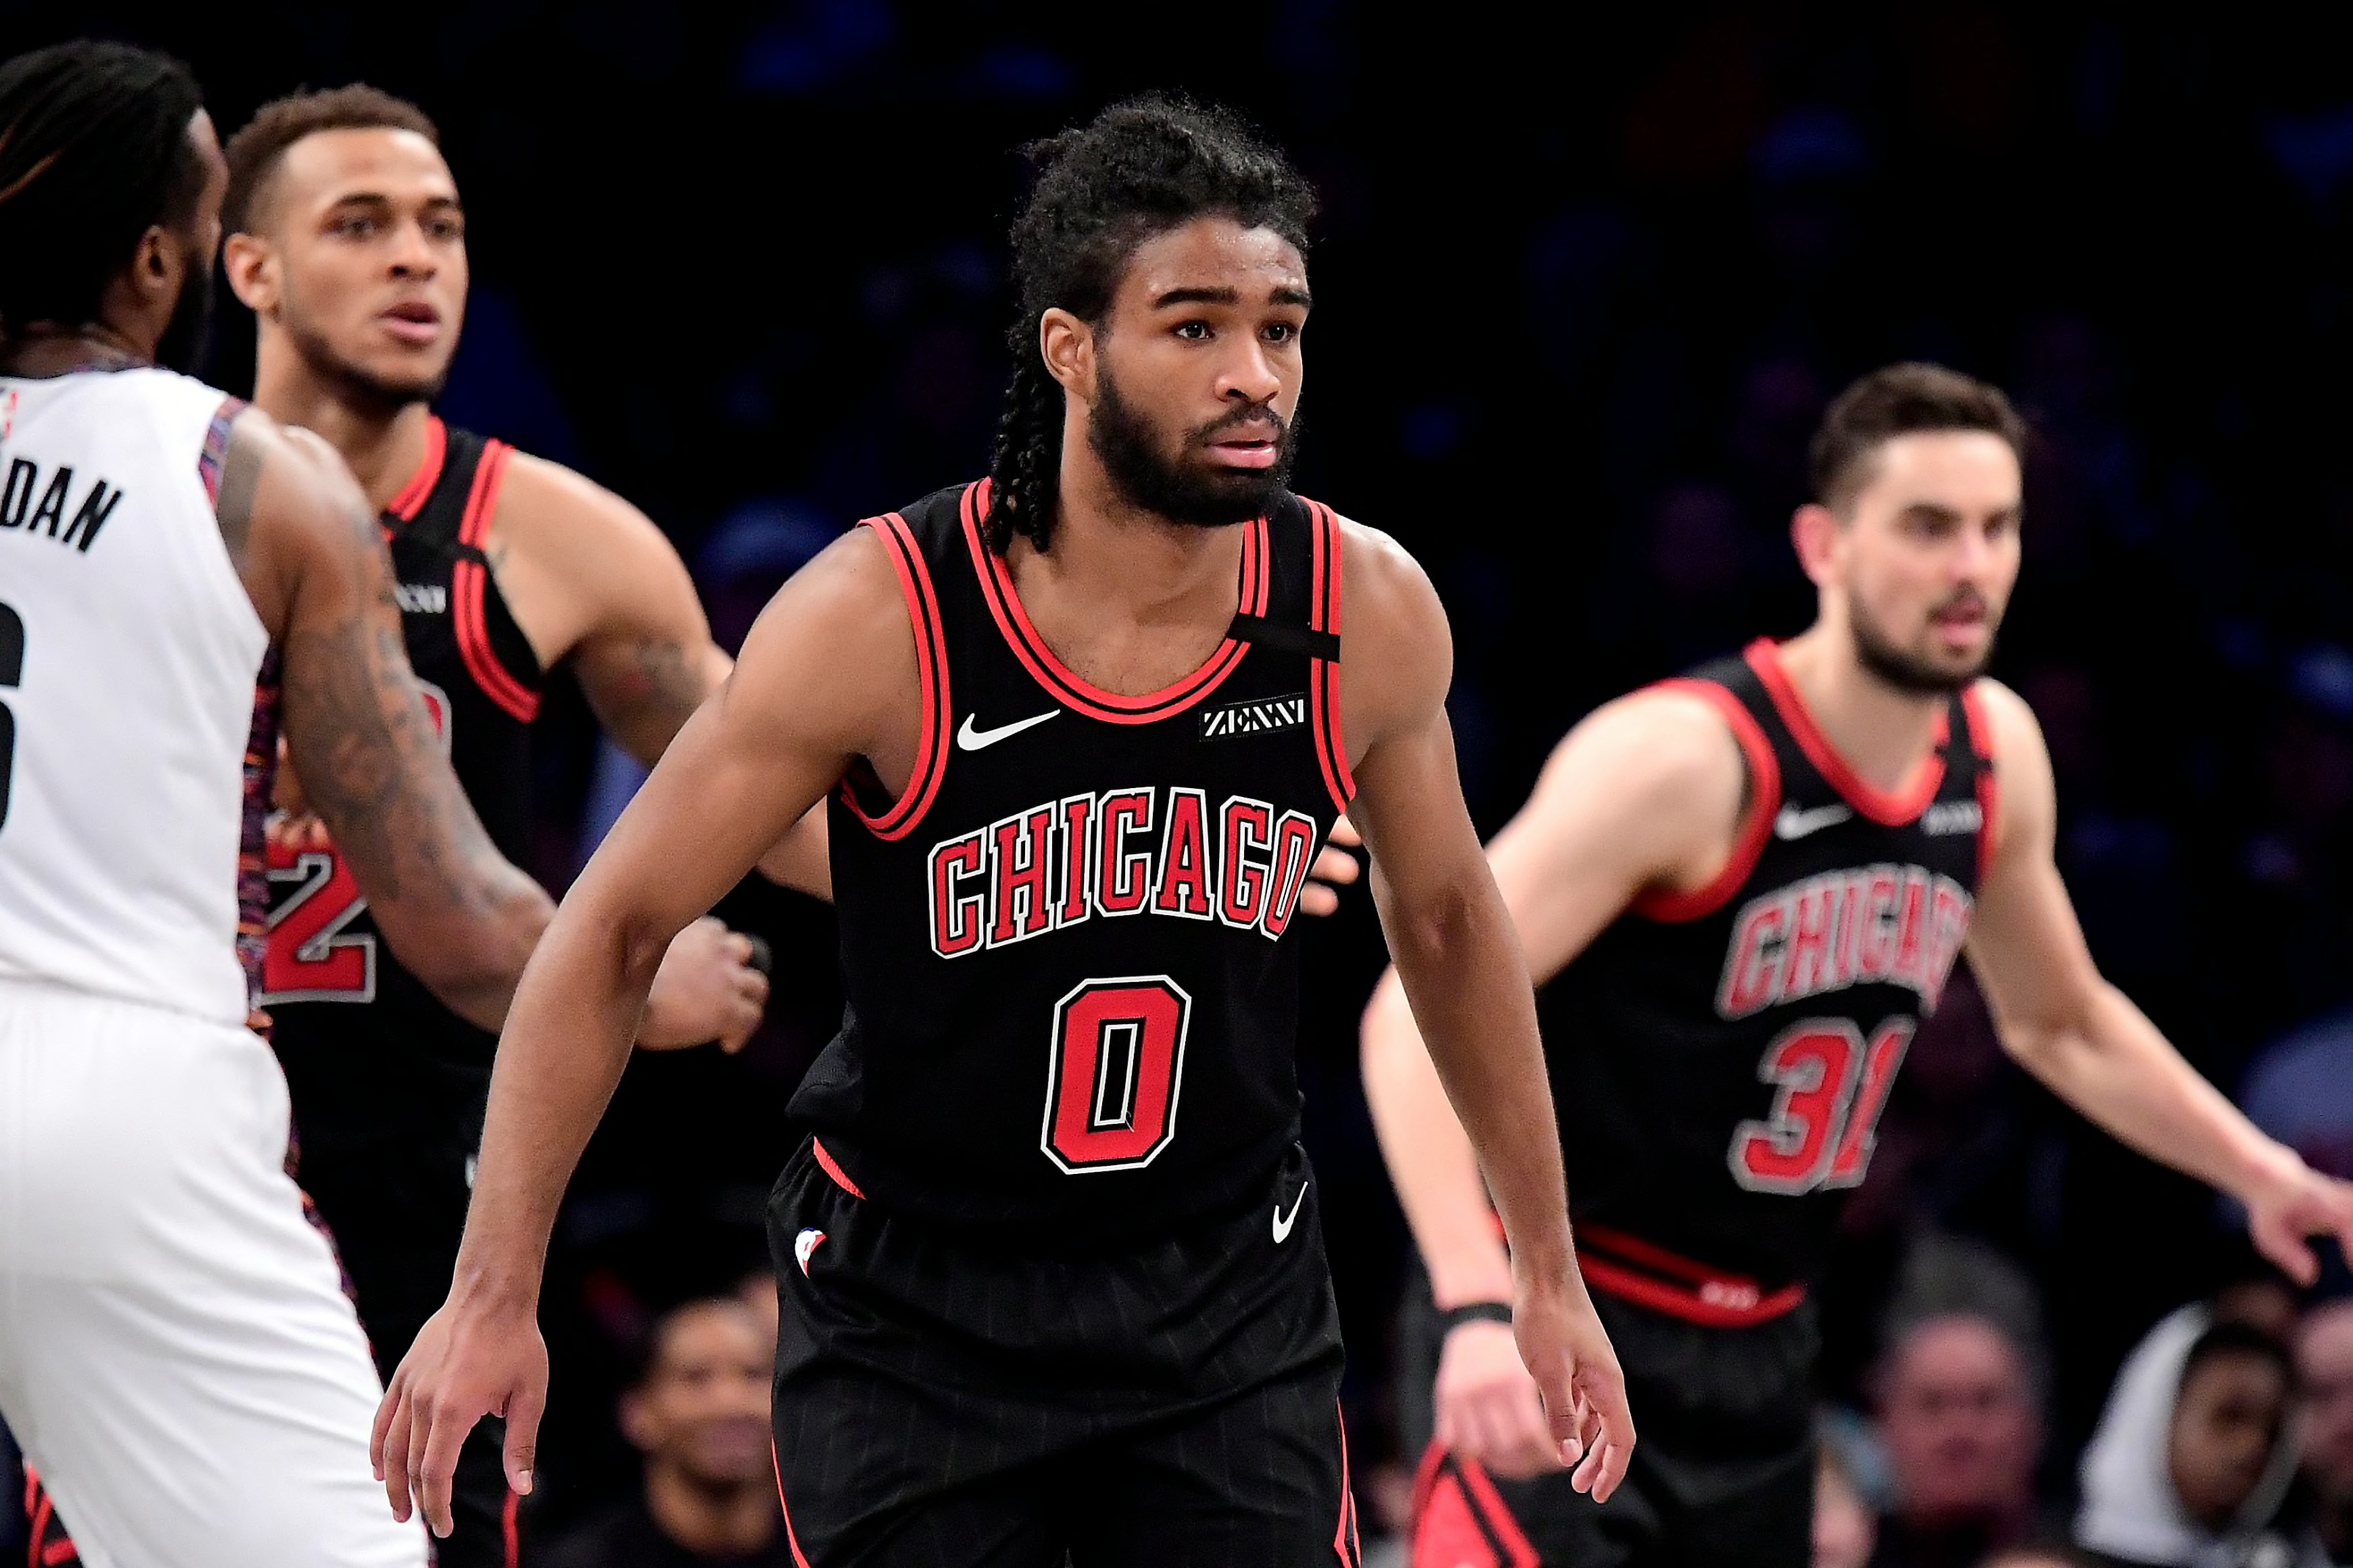 NBA Draft 2020: Top options for Chicago Bulls to pick in 1st round